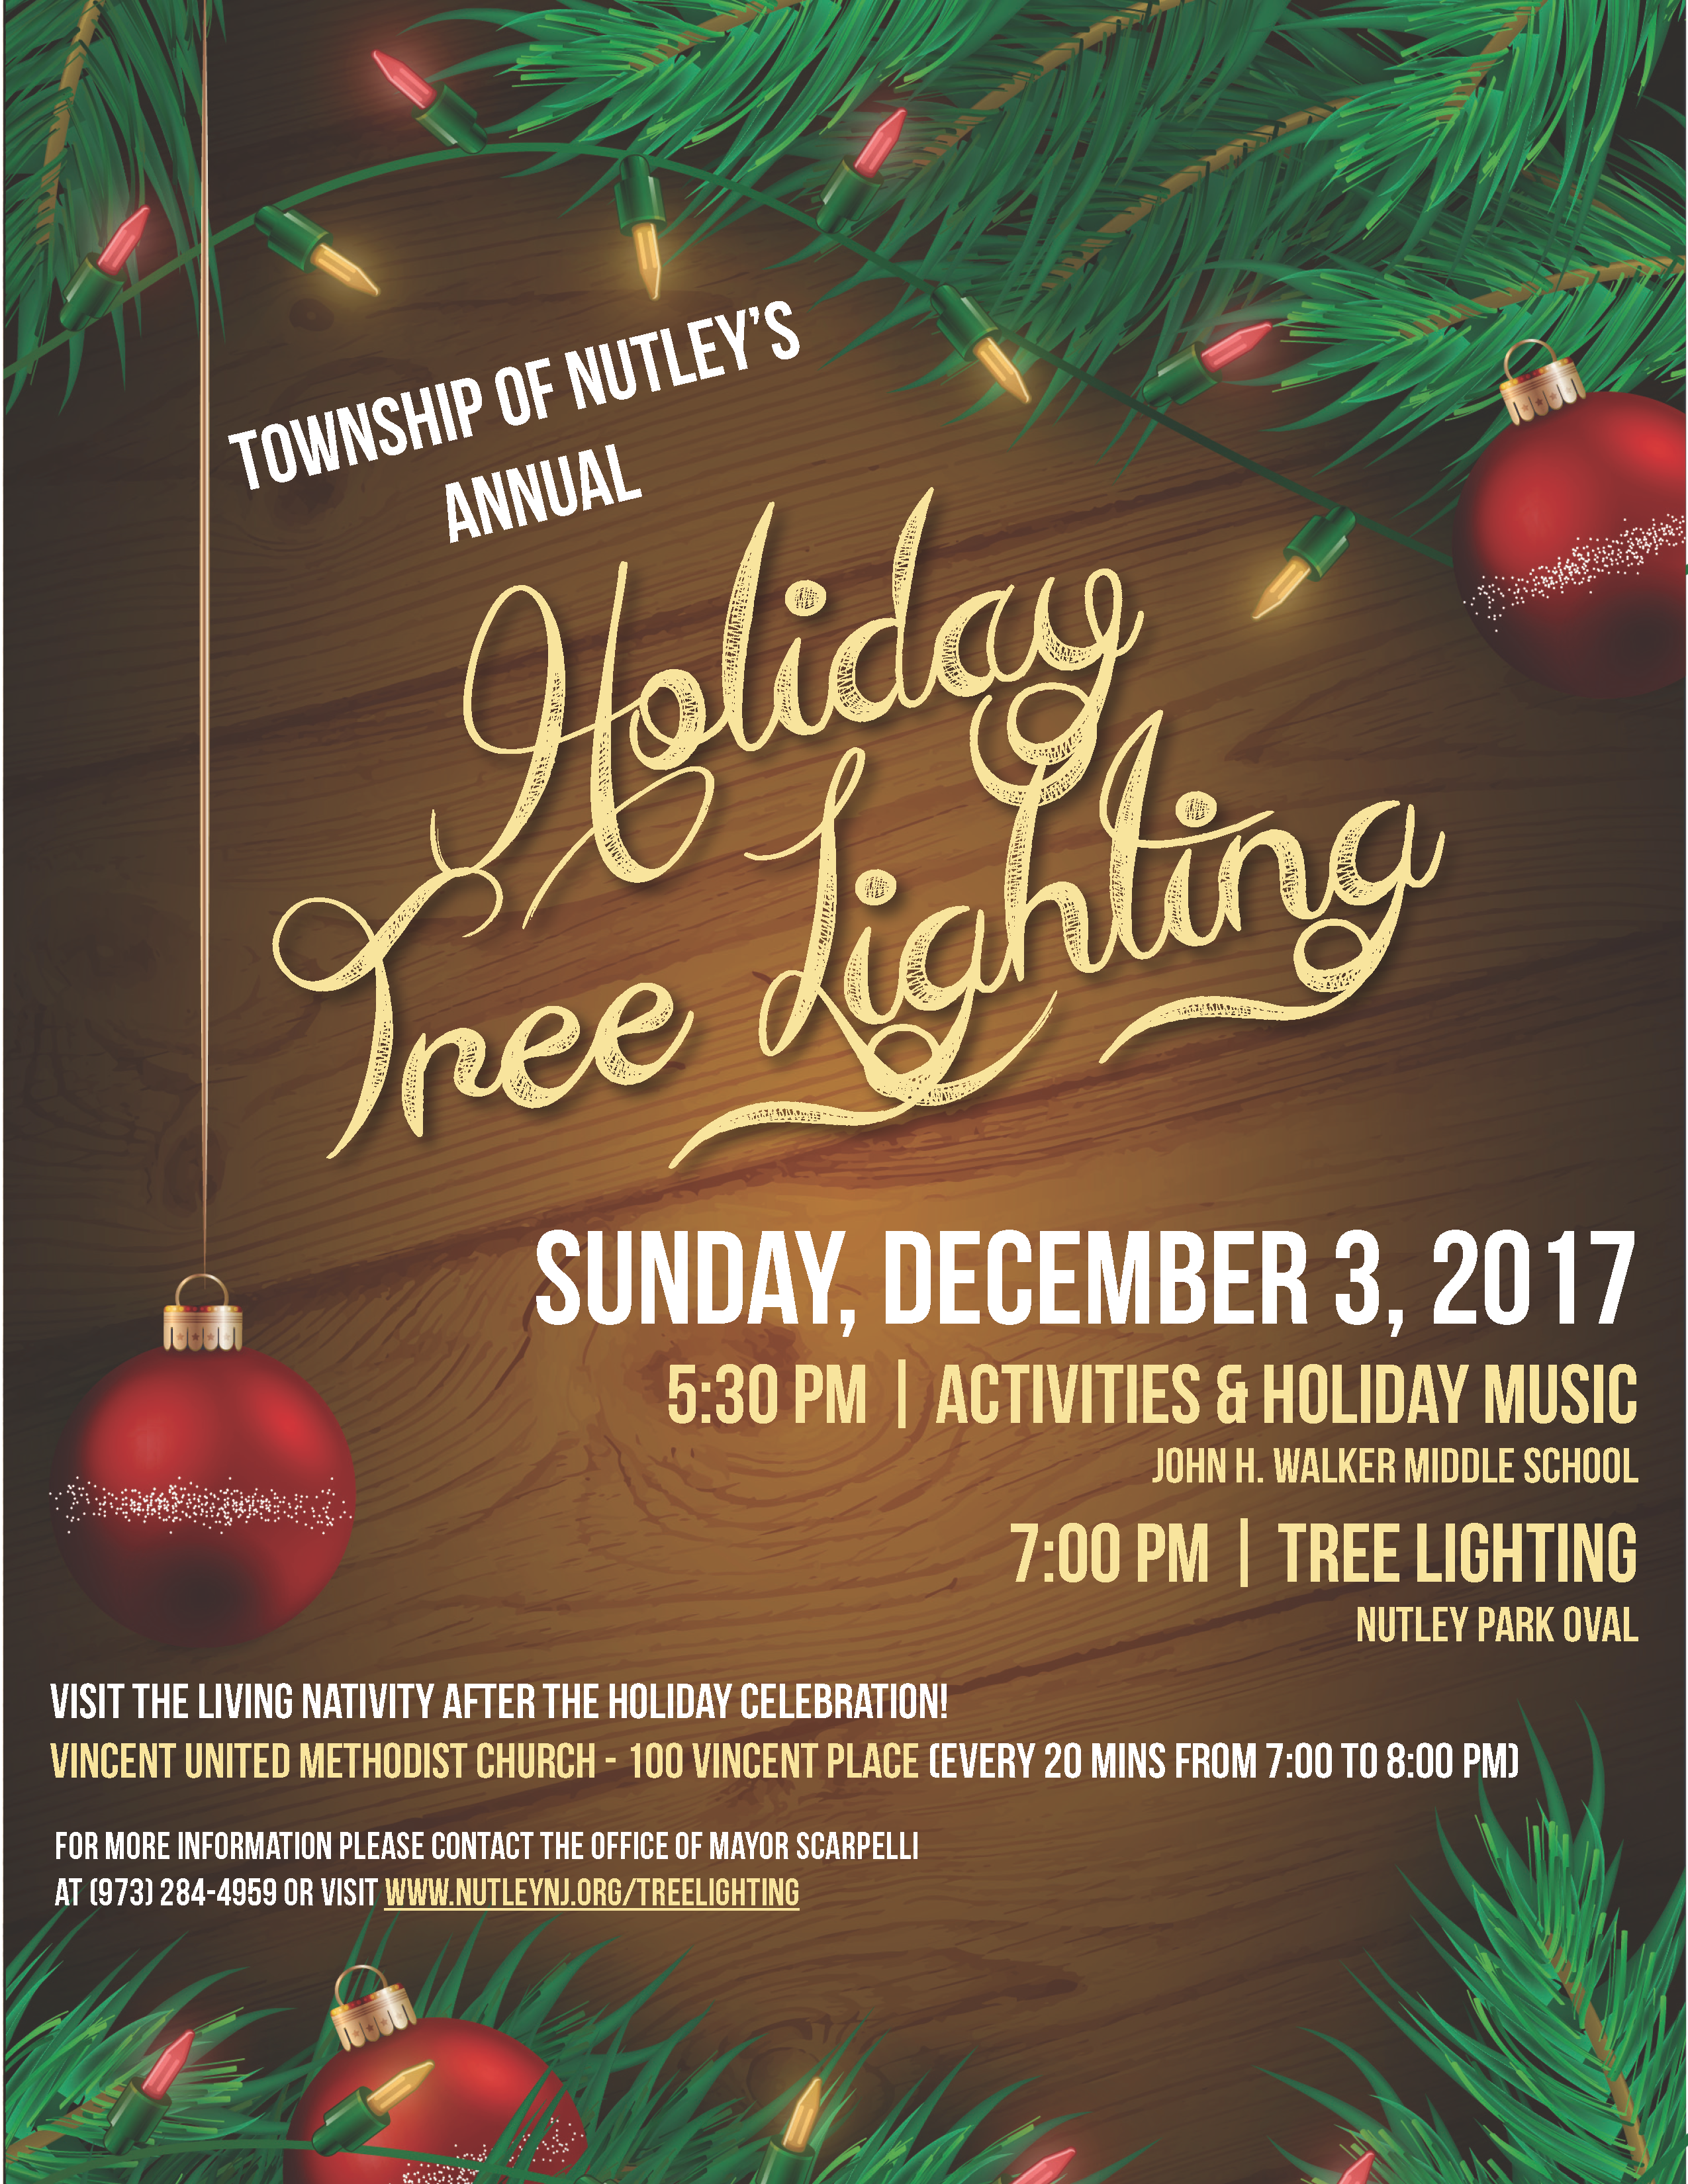 Nutley, New Jersey - Township of Nutley's Annual Holiday Tree Lighting